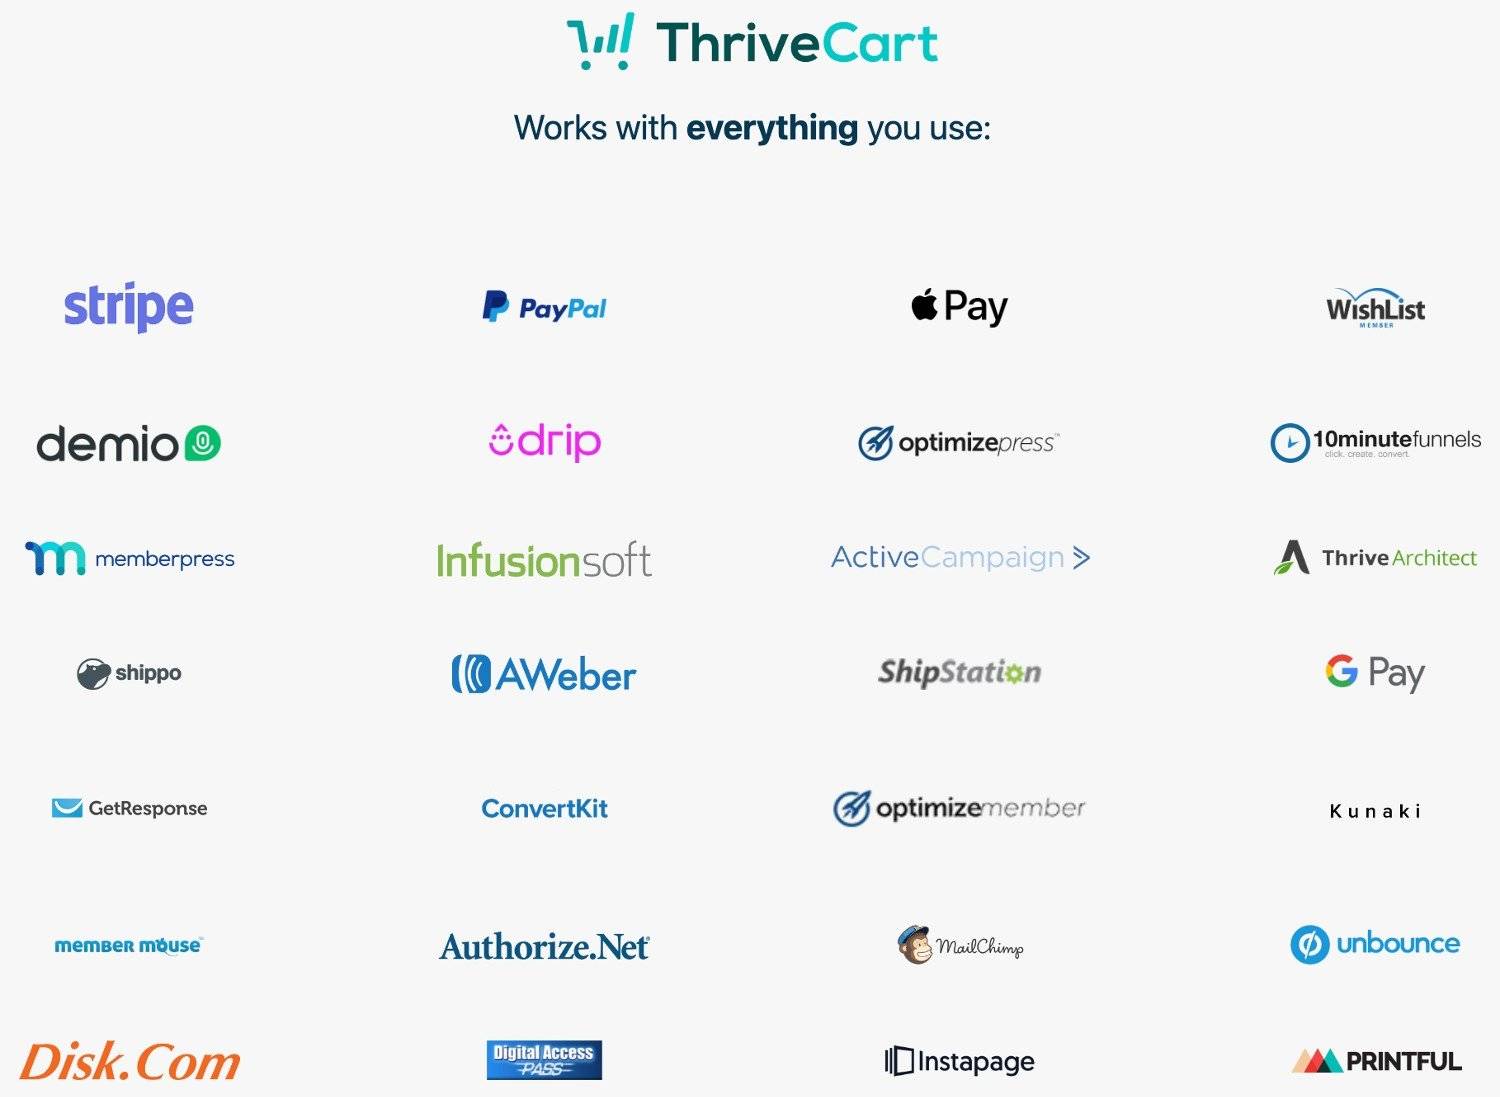 ThriveCart offers a one time payment that allows you to sell physical products, digital ones, and host your affiliate program